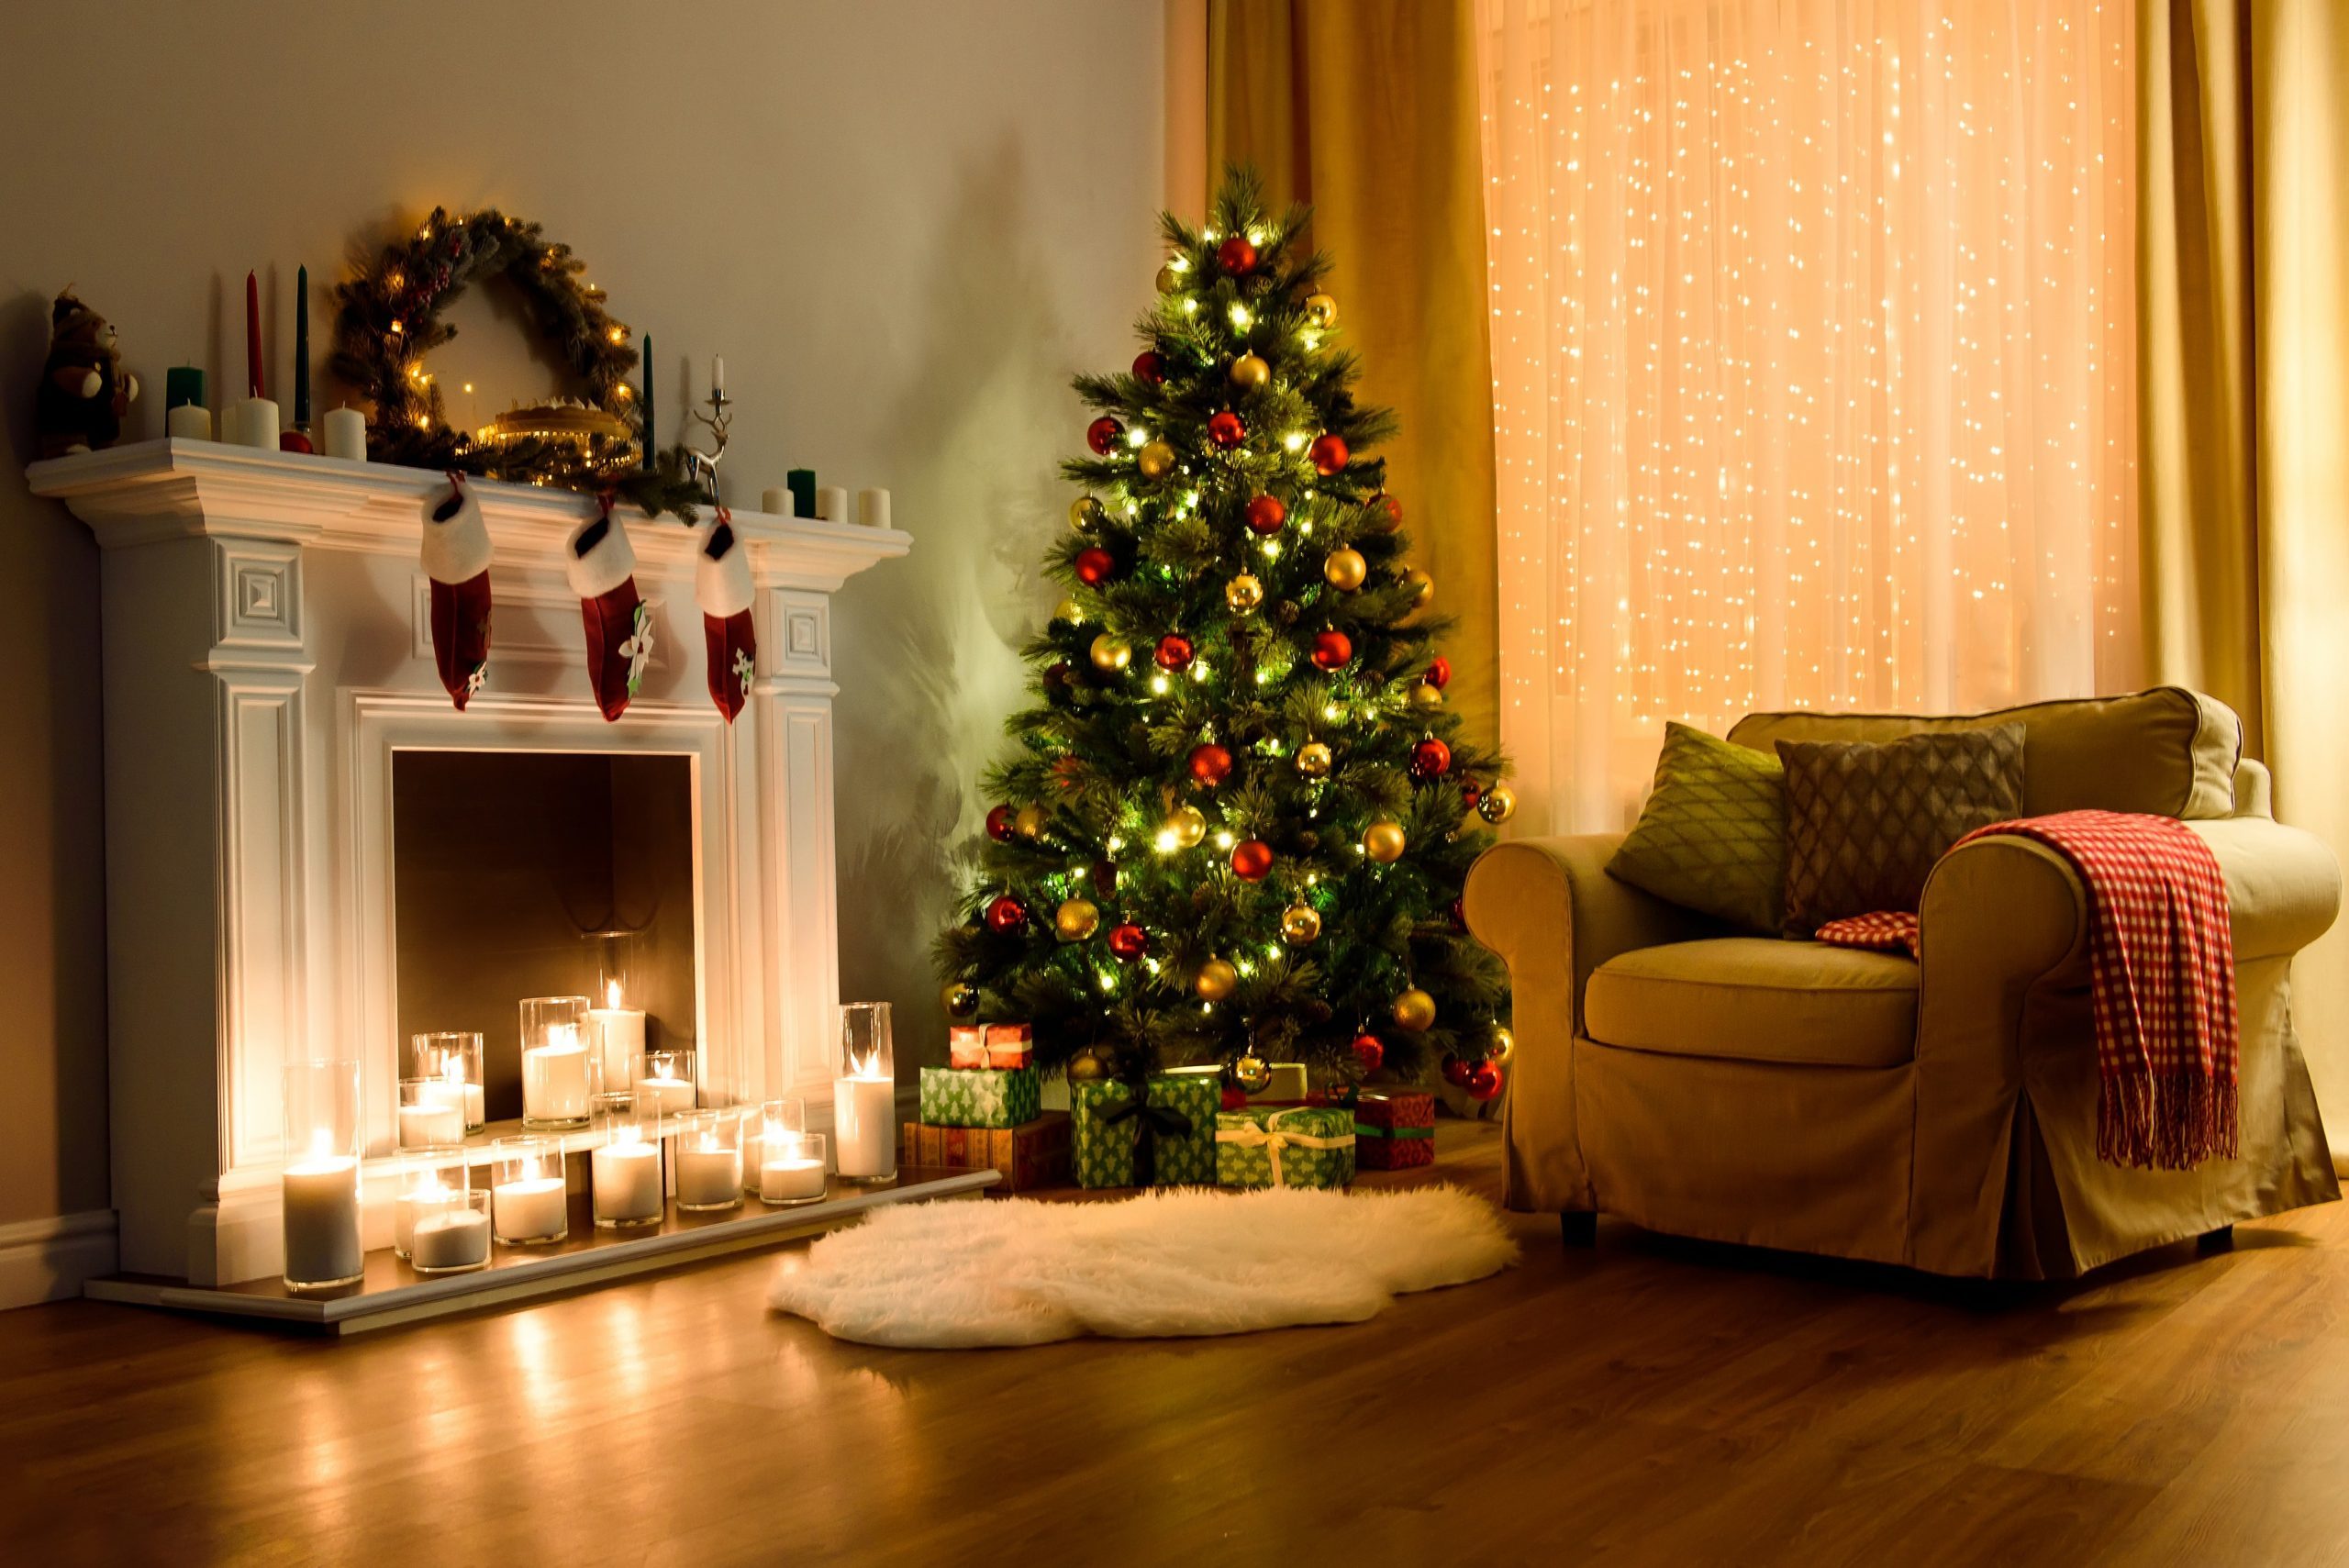 How to at christmas we put decorate in the house Tips and ideas for ...